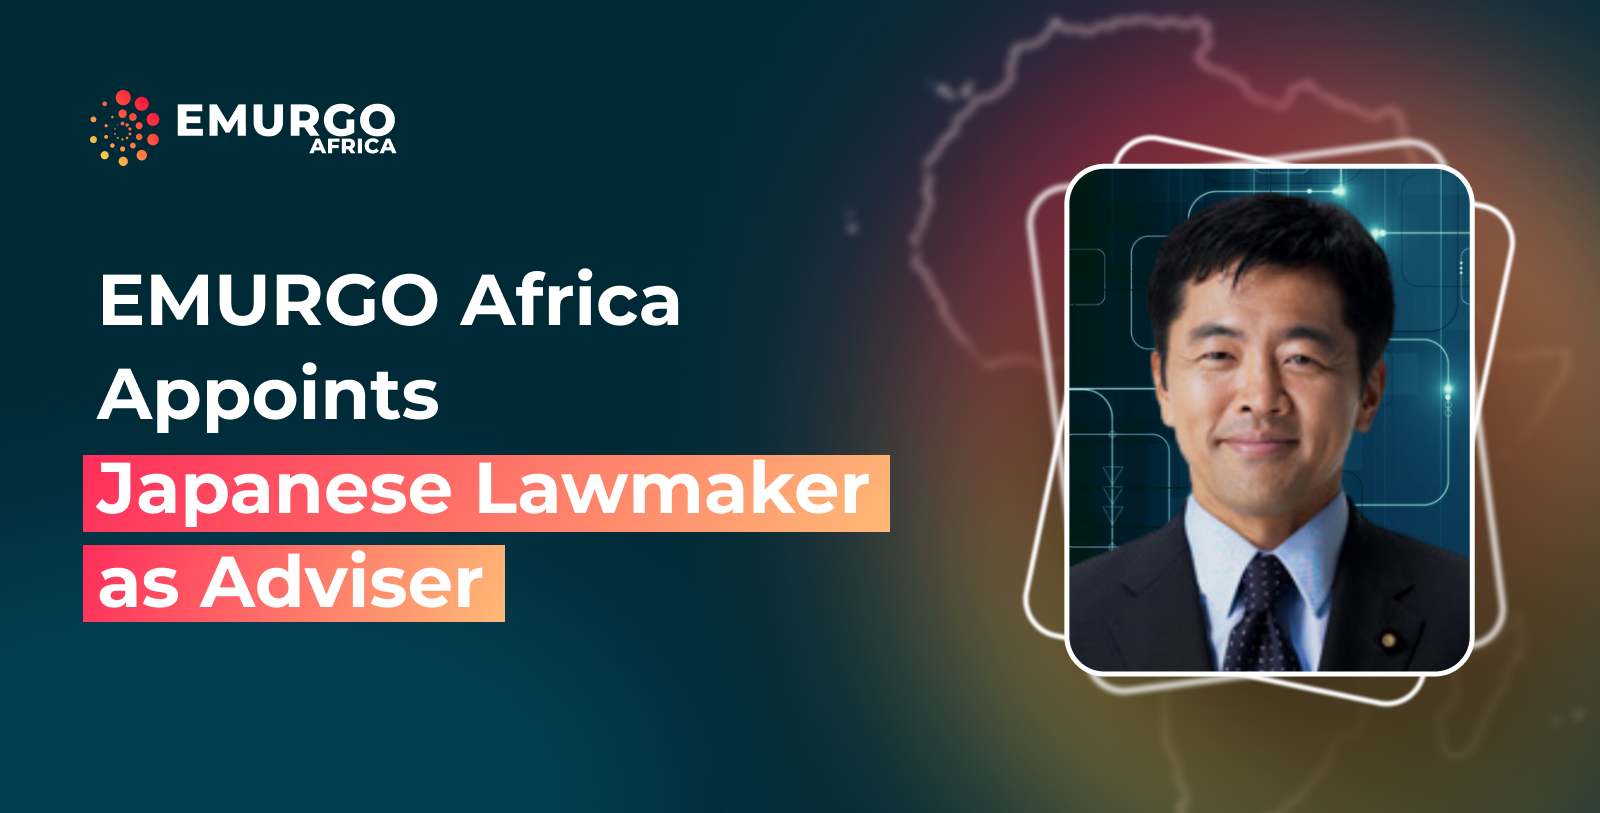 Former Japanese Lawmaker Appointed as Cardano’s EMURGO Middle East & Africa Adviser